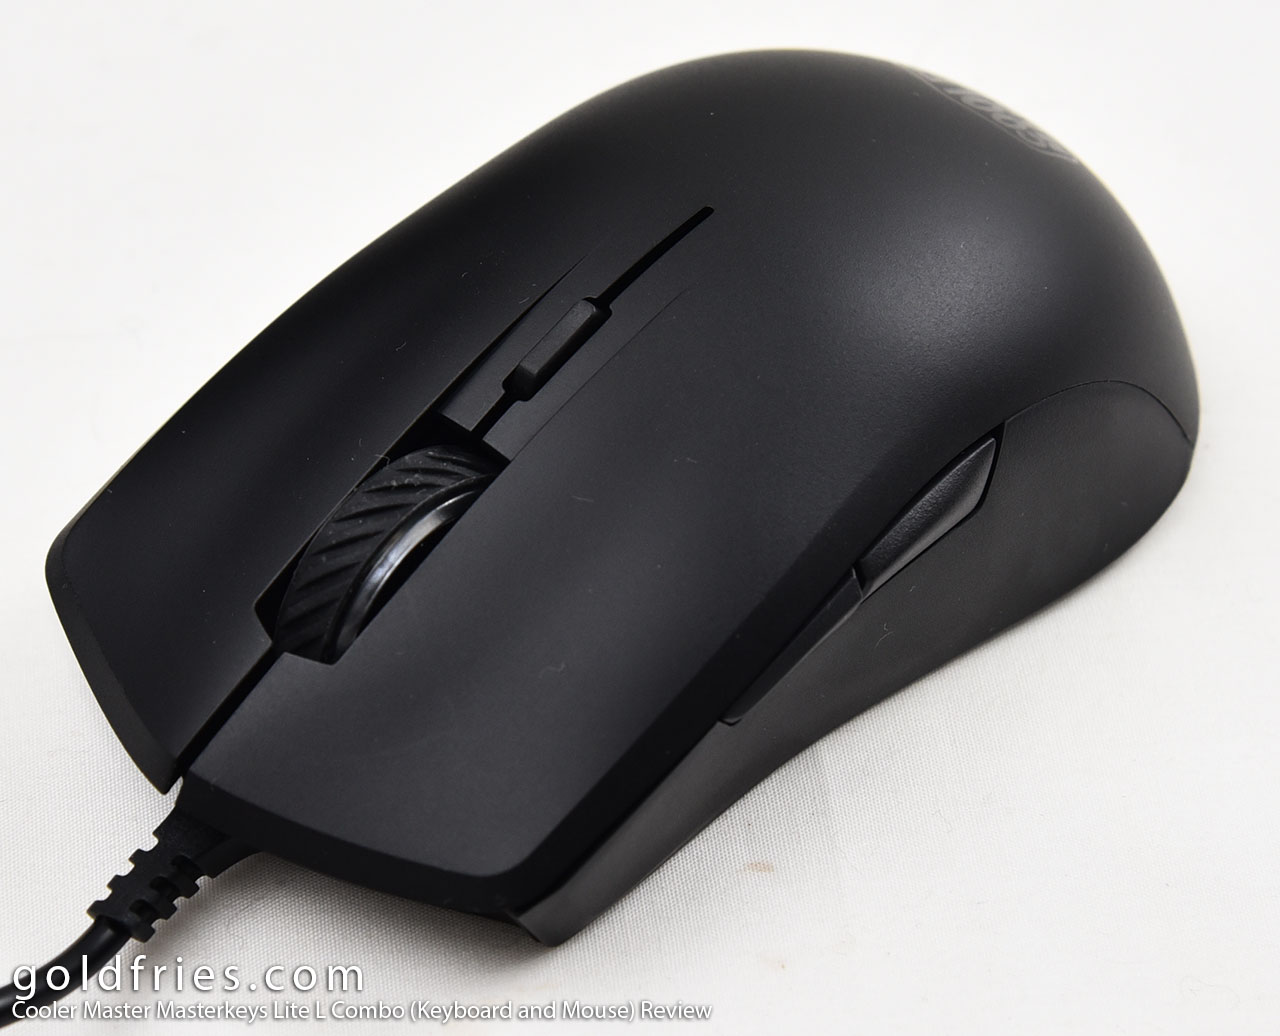 Cooler Master Masterkeys Lite L Combo (Keyboard and Mouse) Review